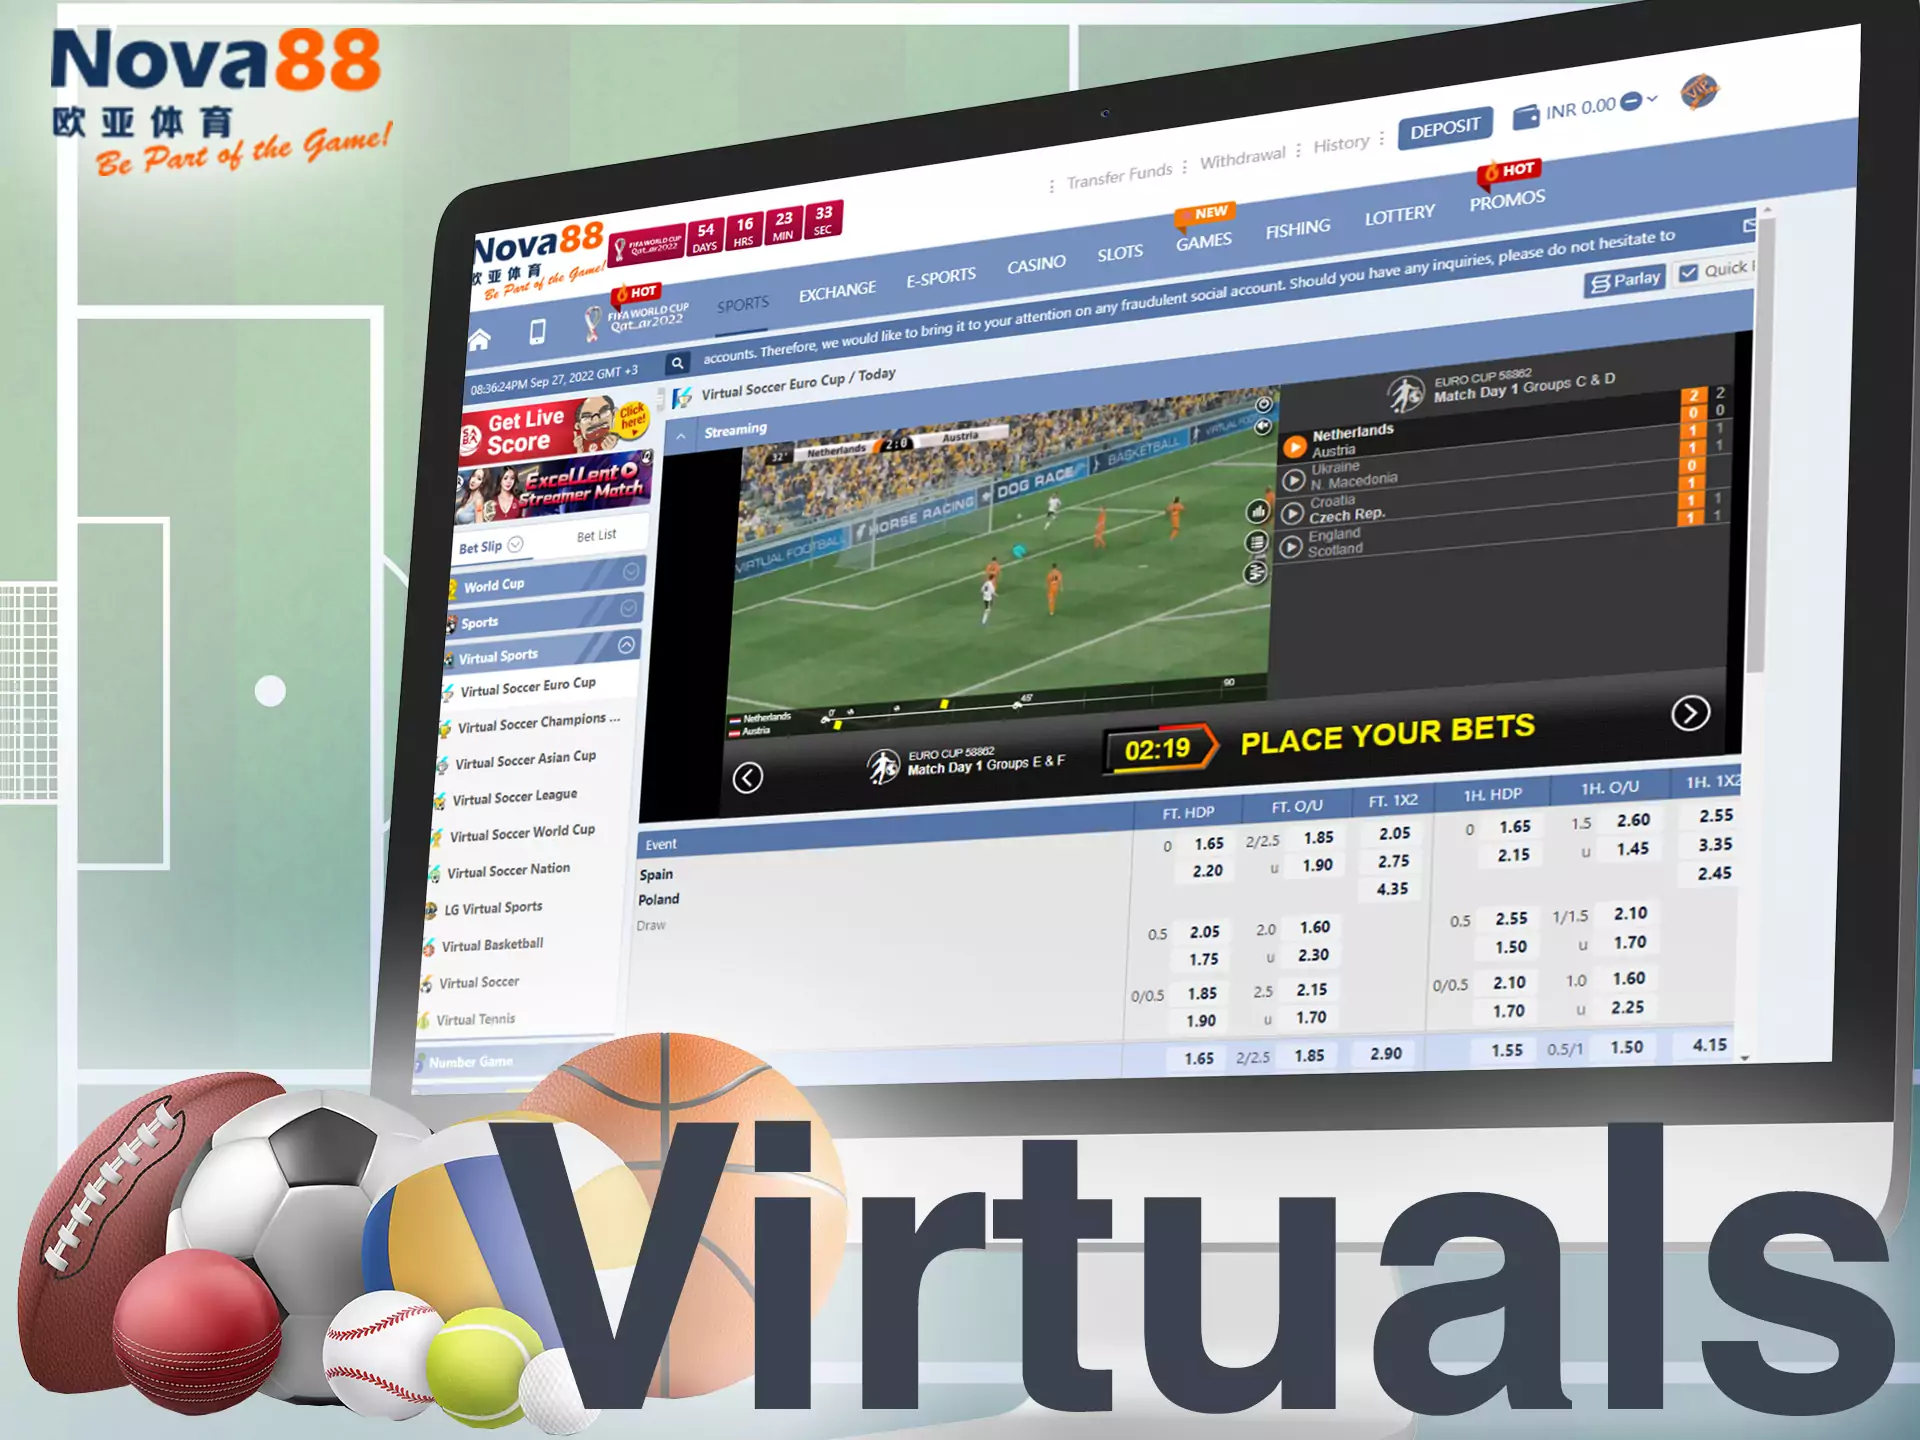 Besides traditional sports betting, you can bet on virtual events at Nova88.